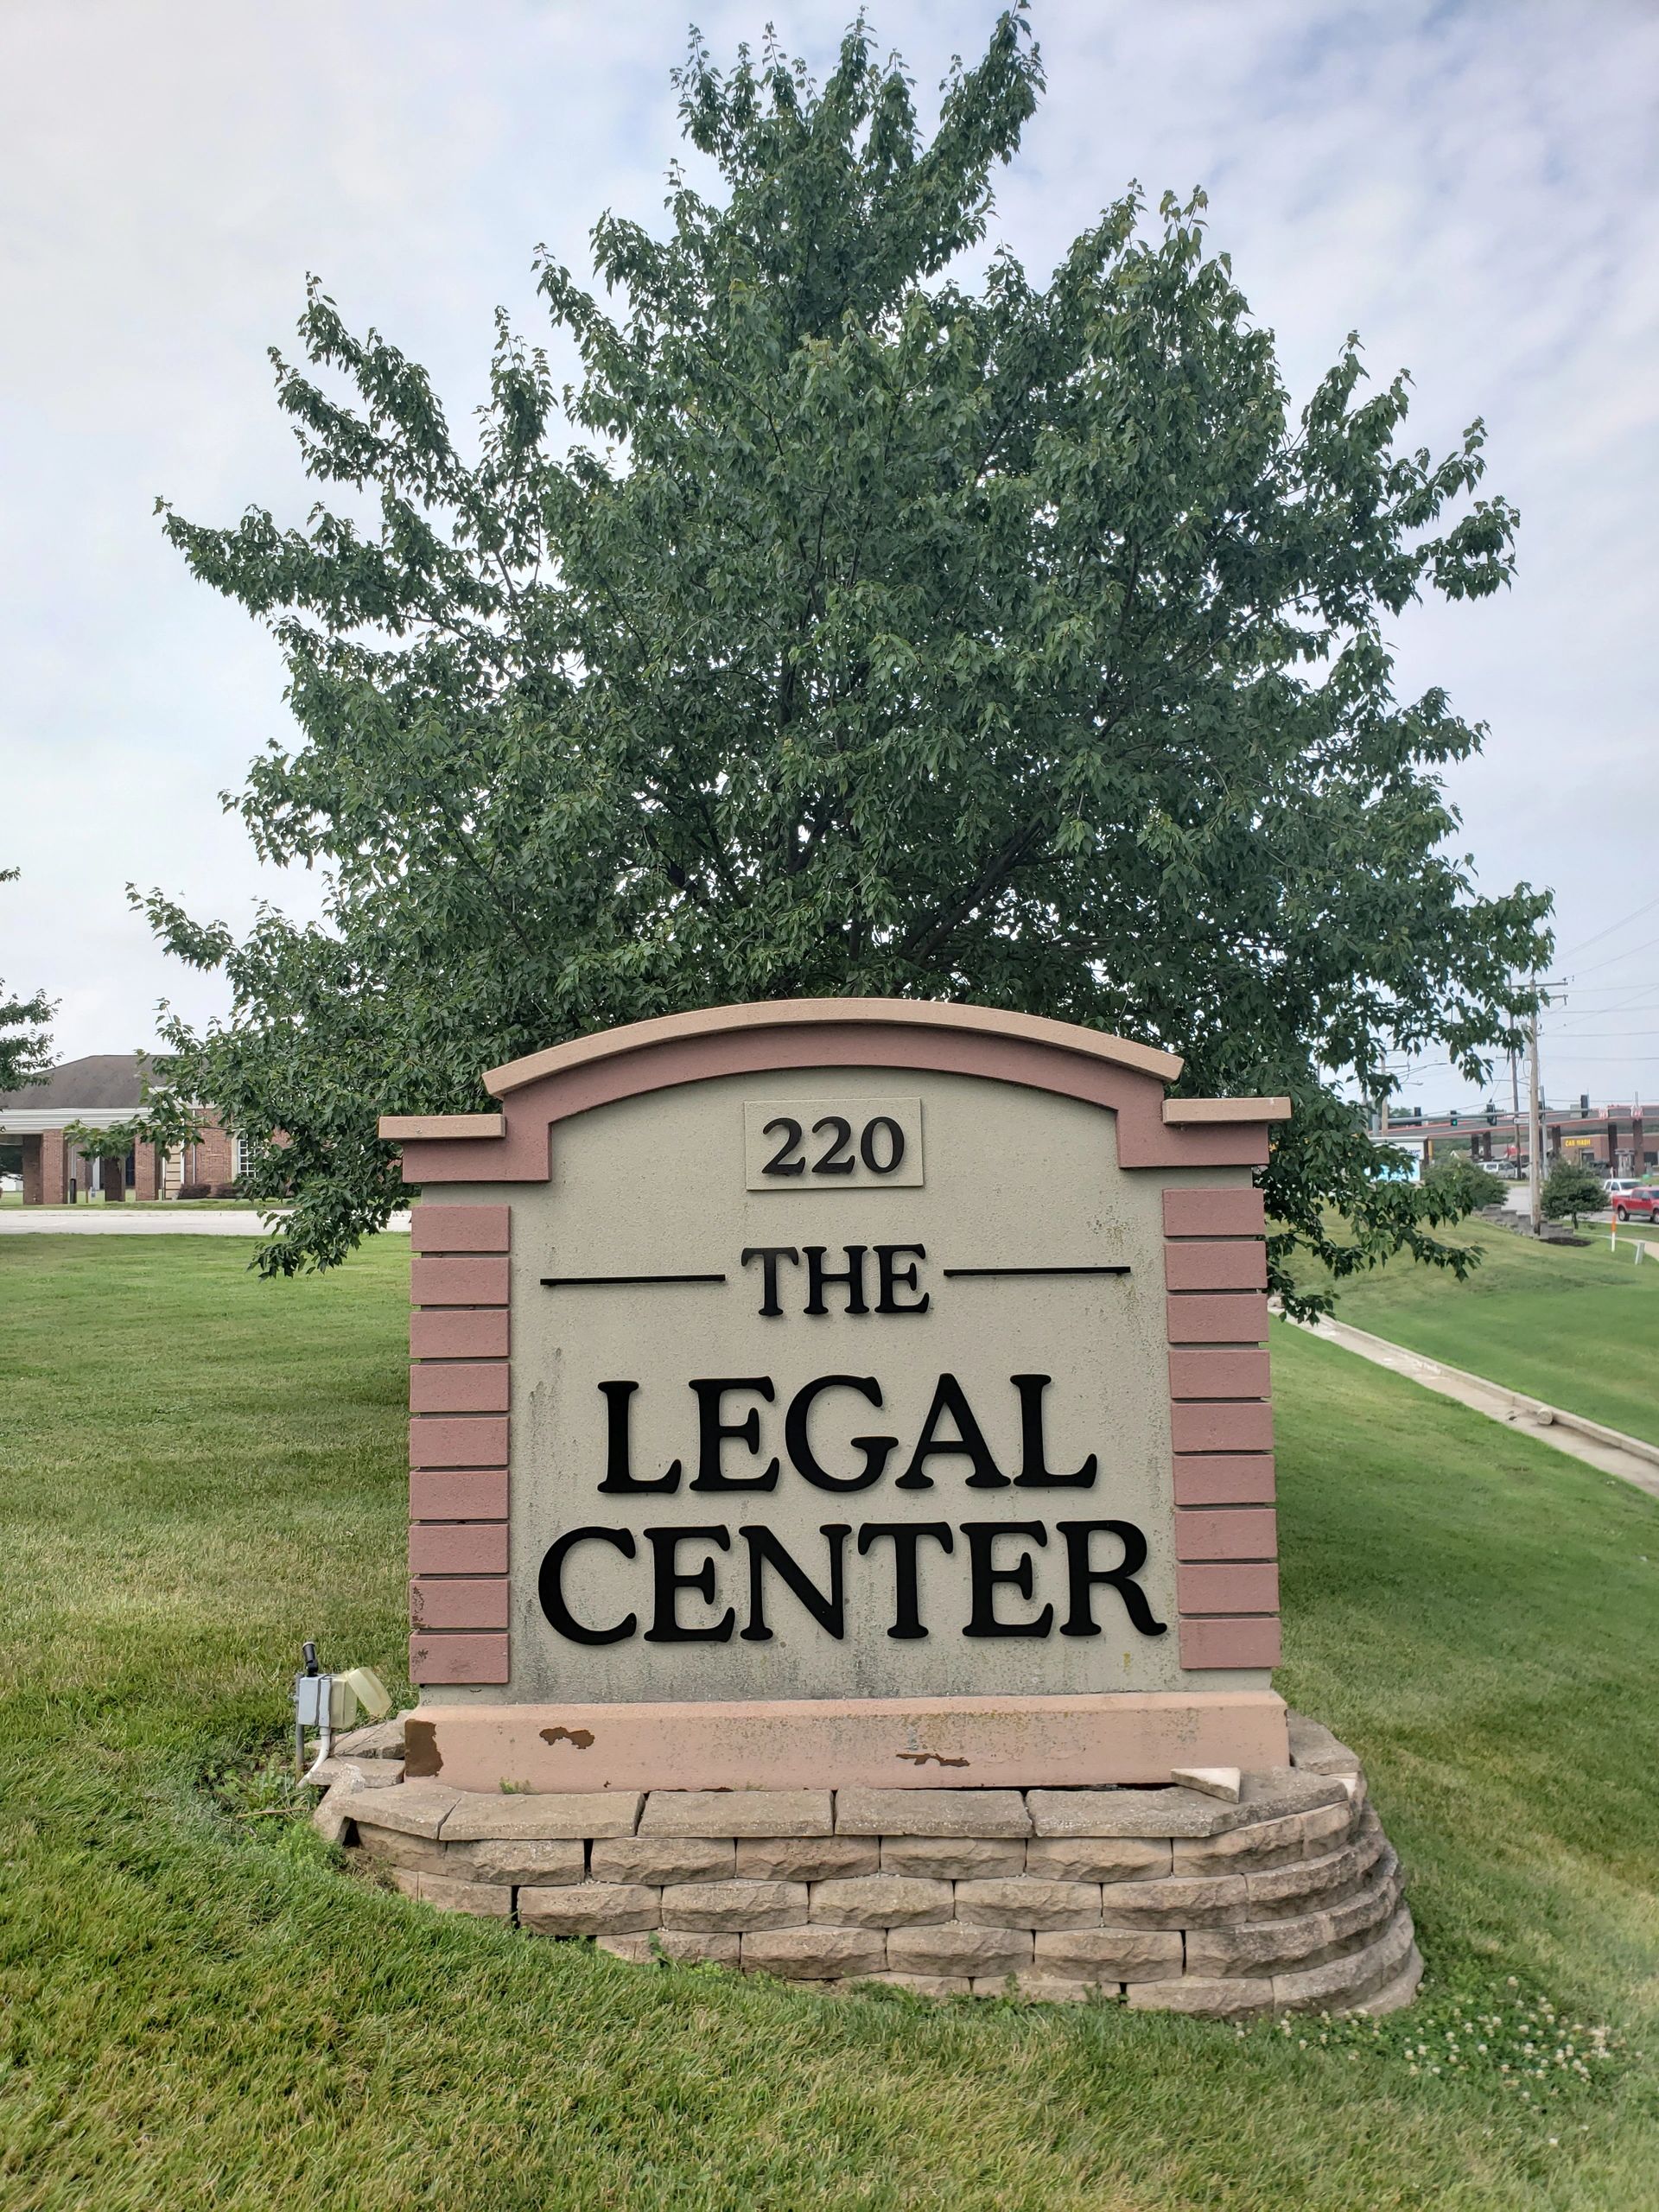 The Legal Center, 220 Salt Lick Road, St. Peters, MO 63376

Curtis Niewald
Niewald Law Firm